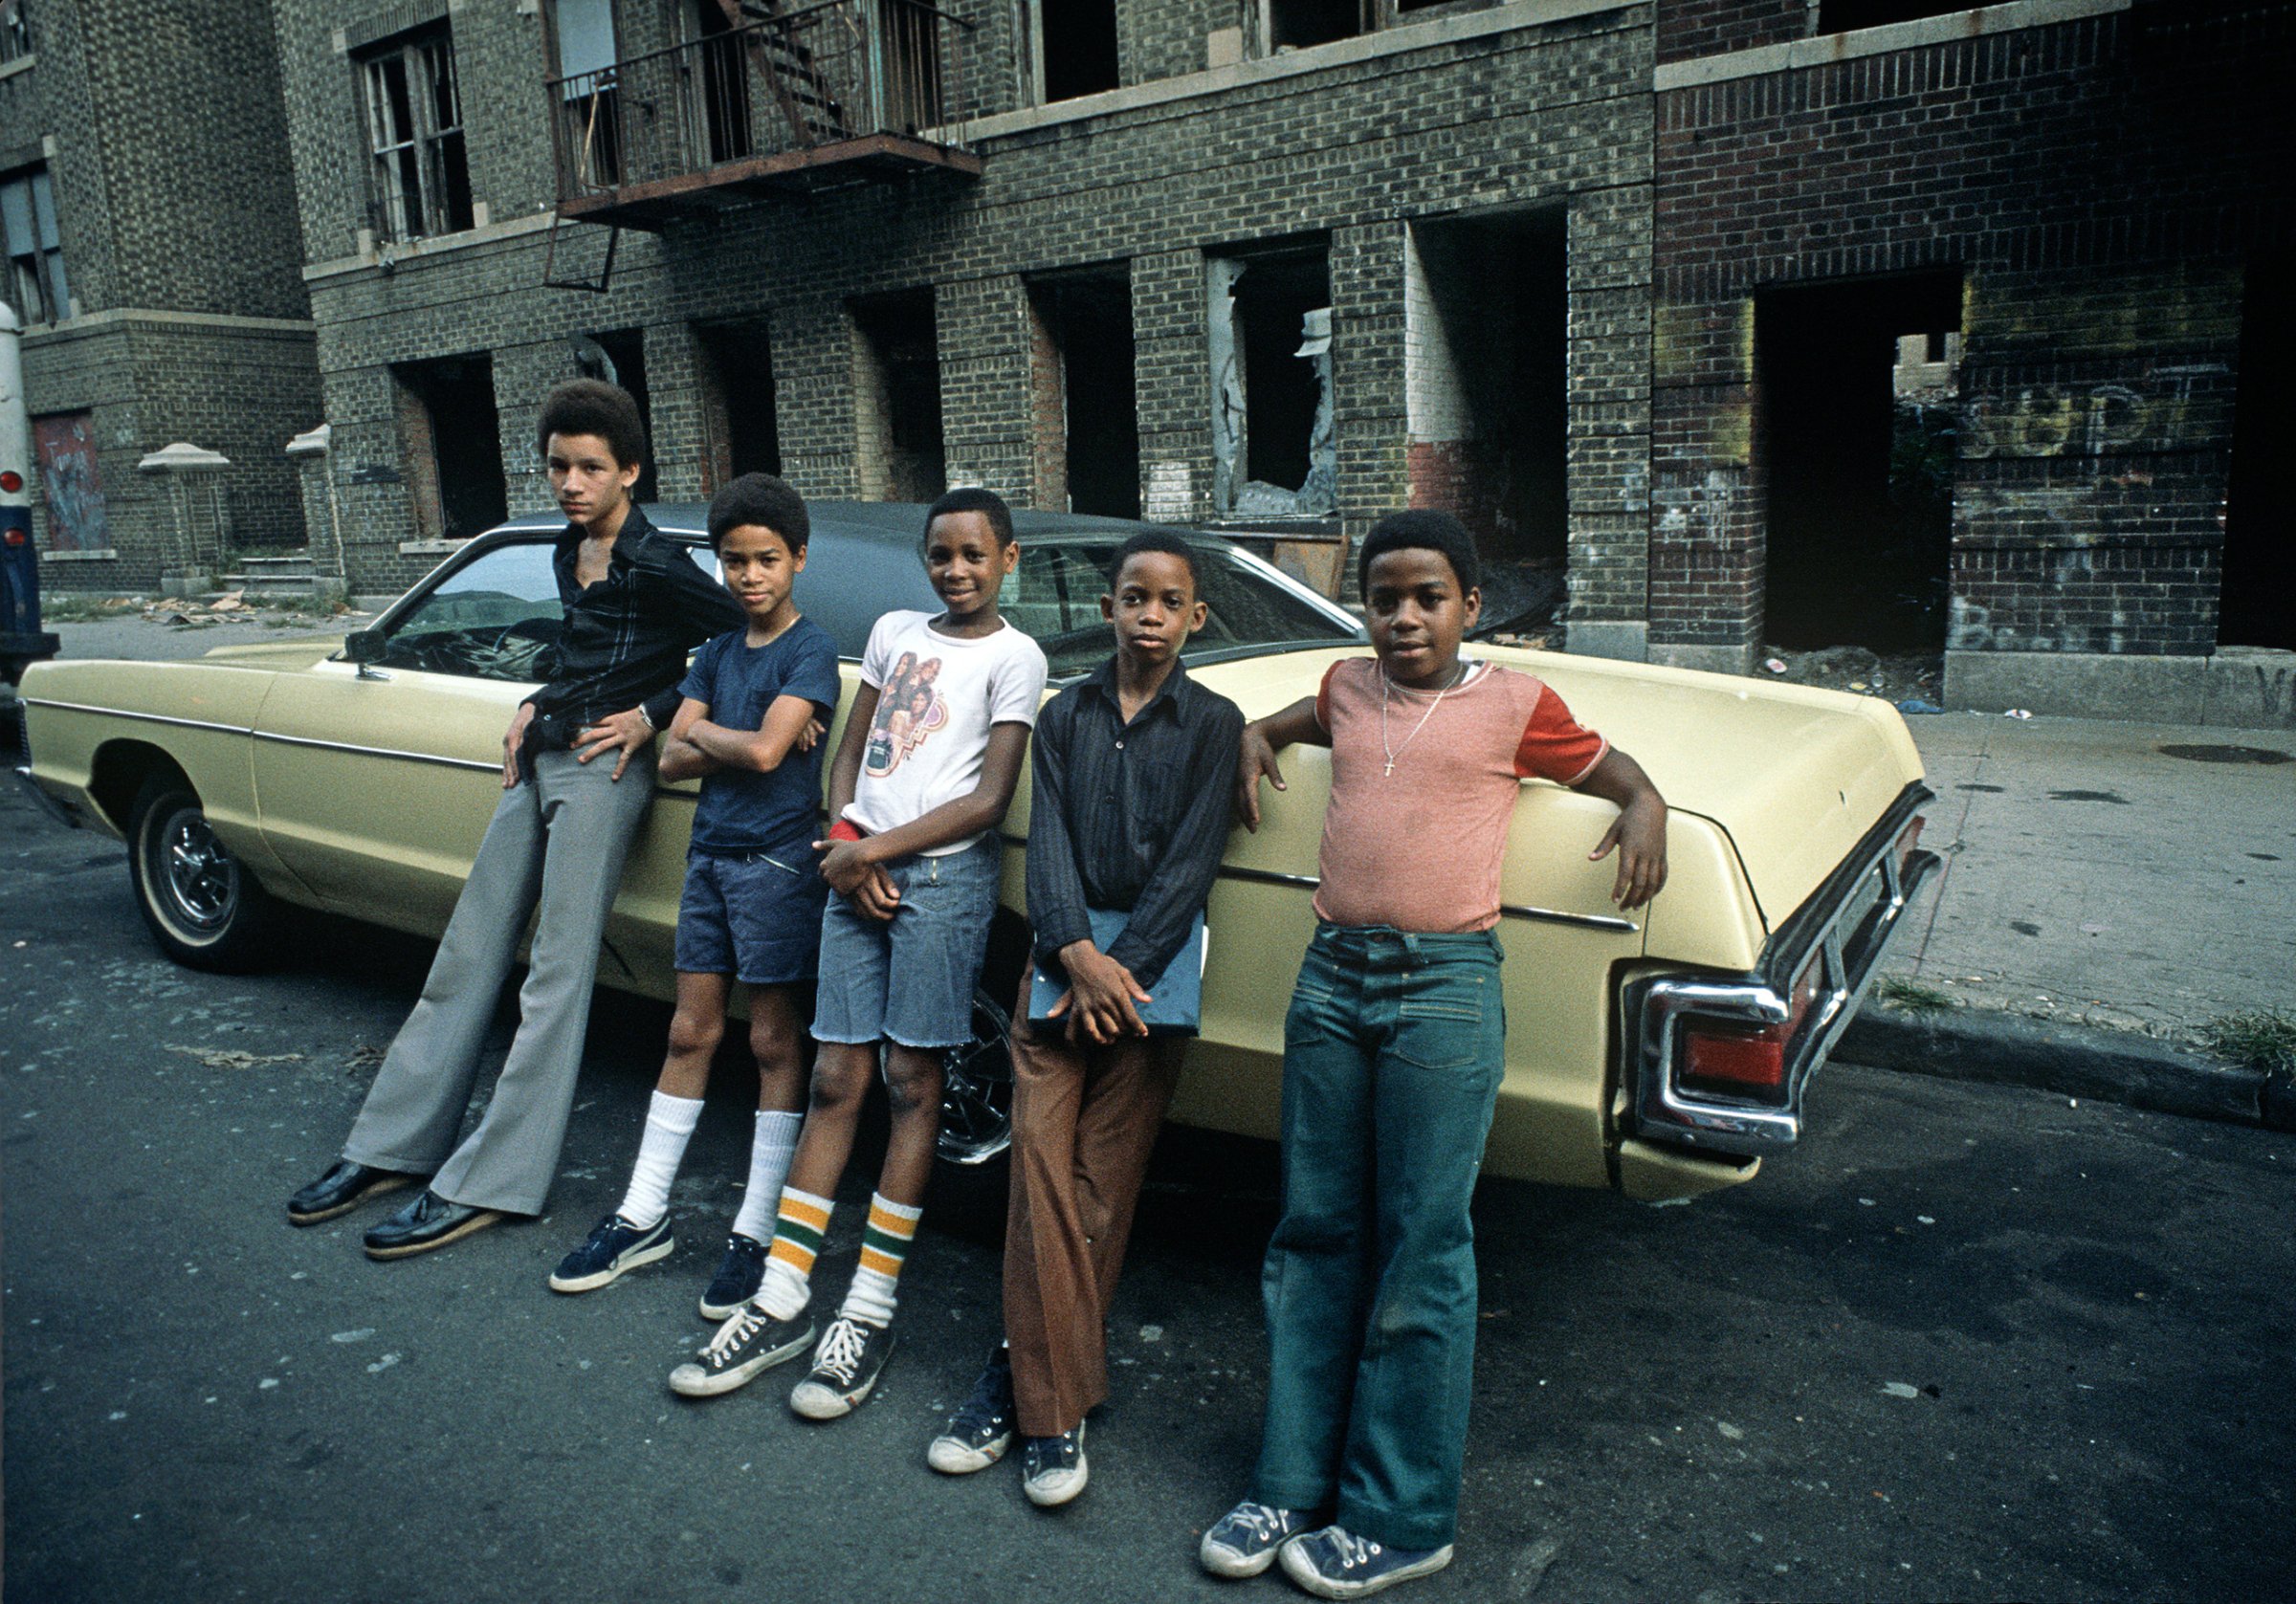 Teenagers in the South Bronx in 1977.